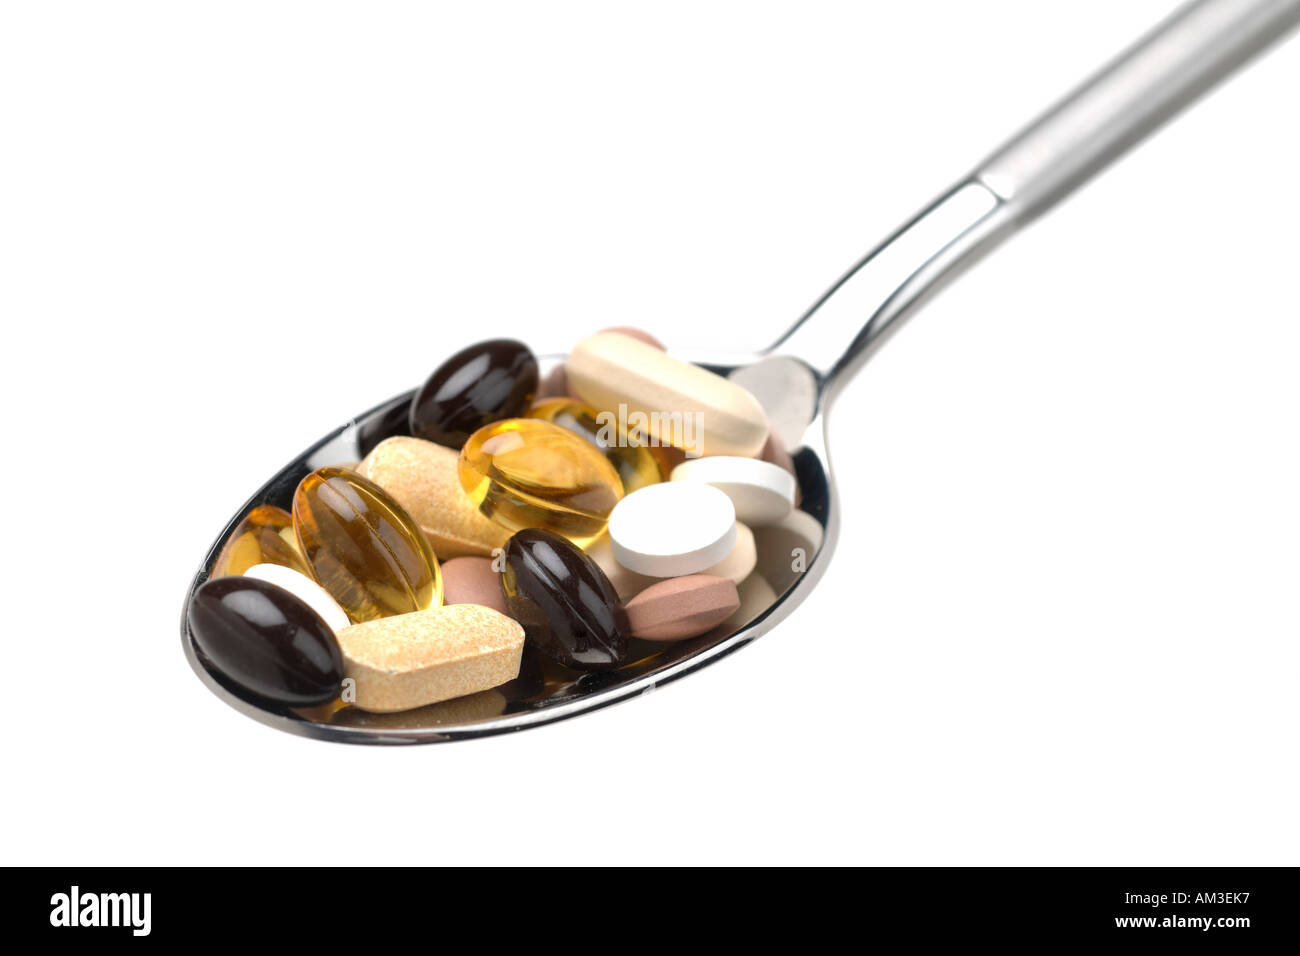 Spoonful of vitamins and food supplements Stock Photo